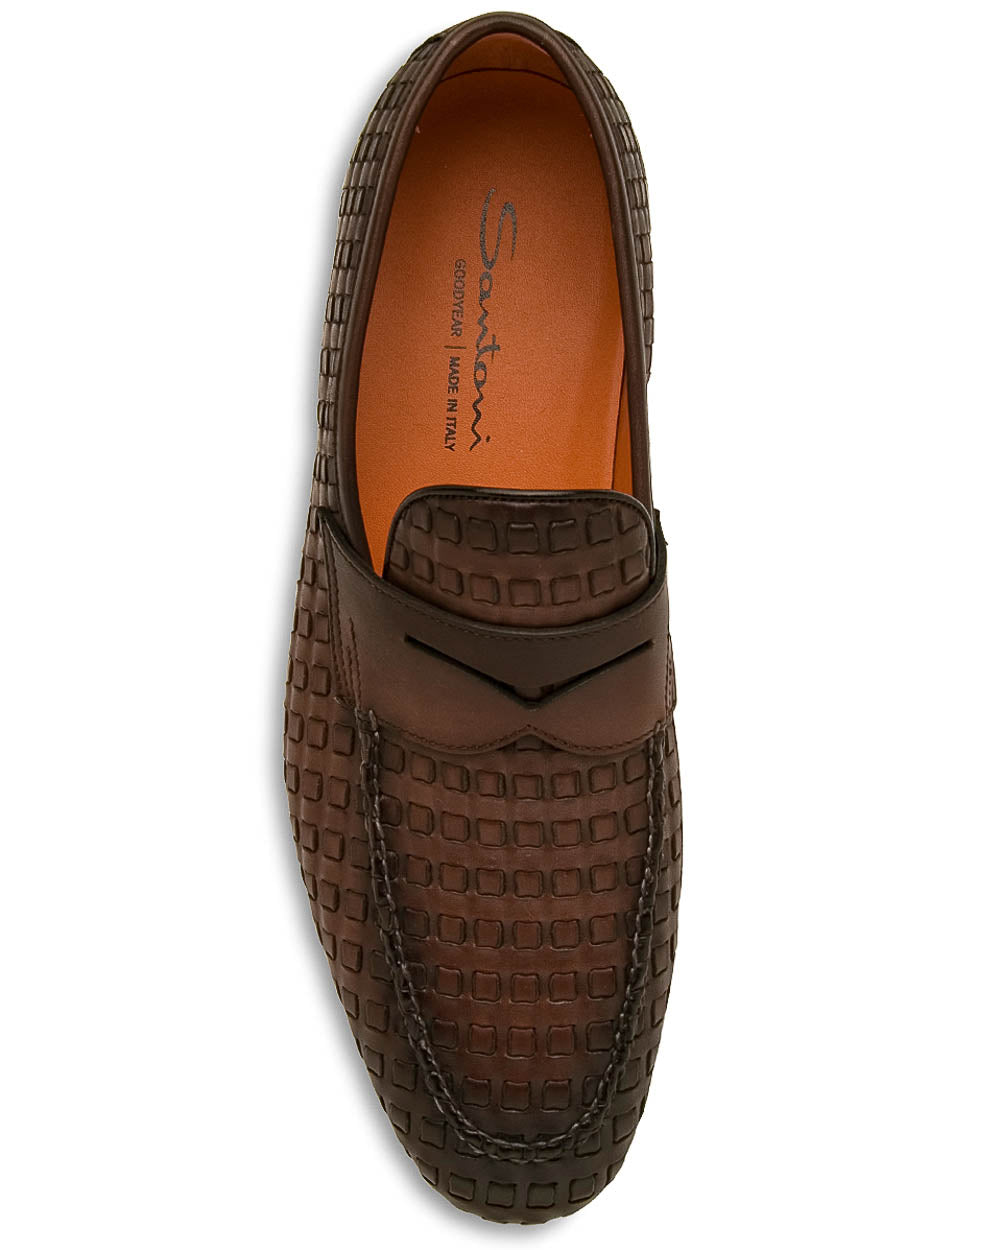 Boundary Penny Loafer in Brown